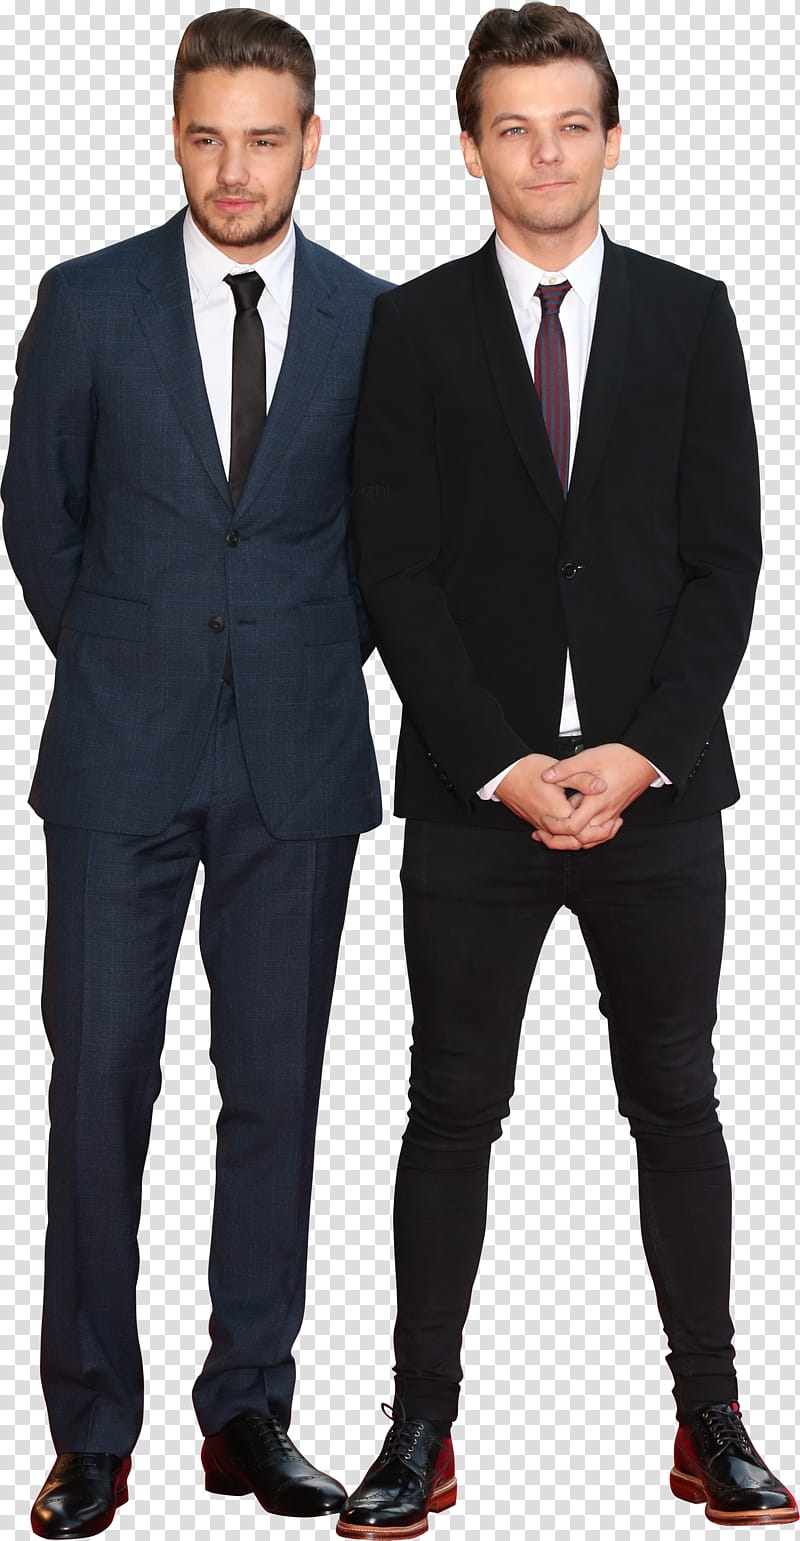 Luois Tomlinson And Liam Payne , Louis Tomlinson and Liam Payne transparent background PNG clipart